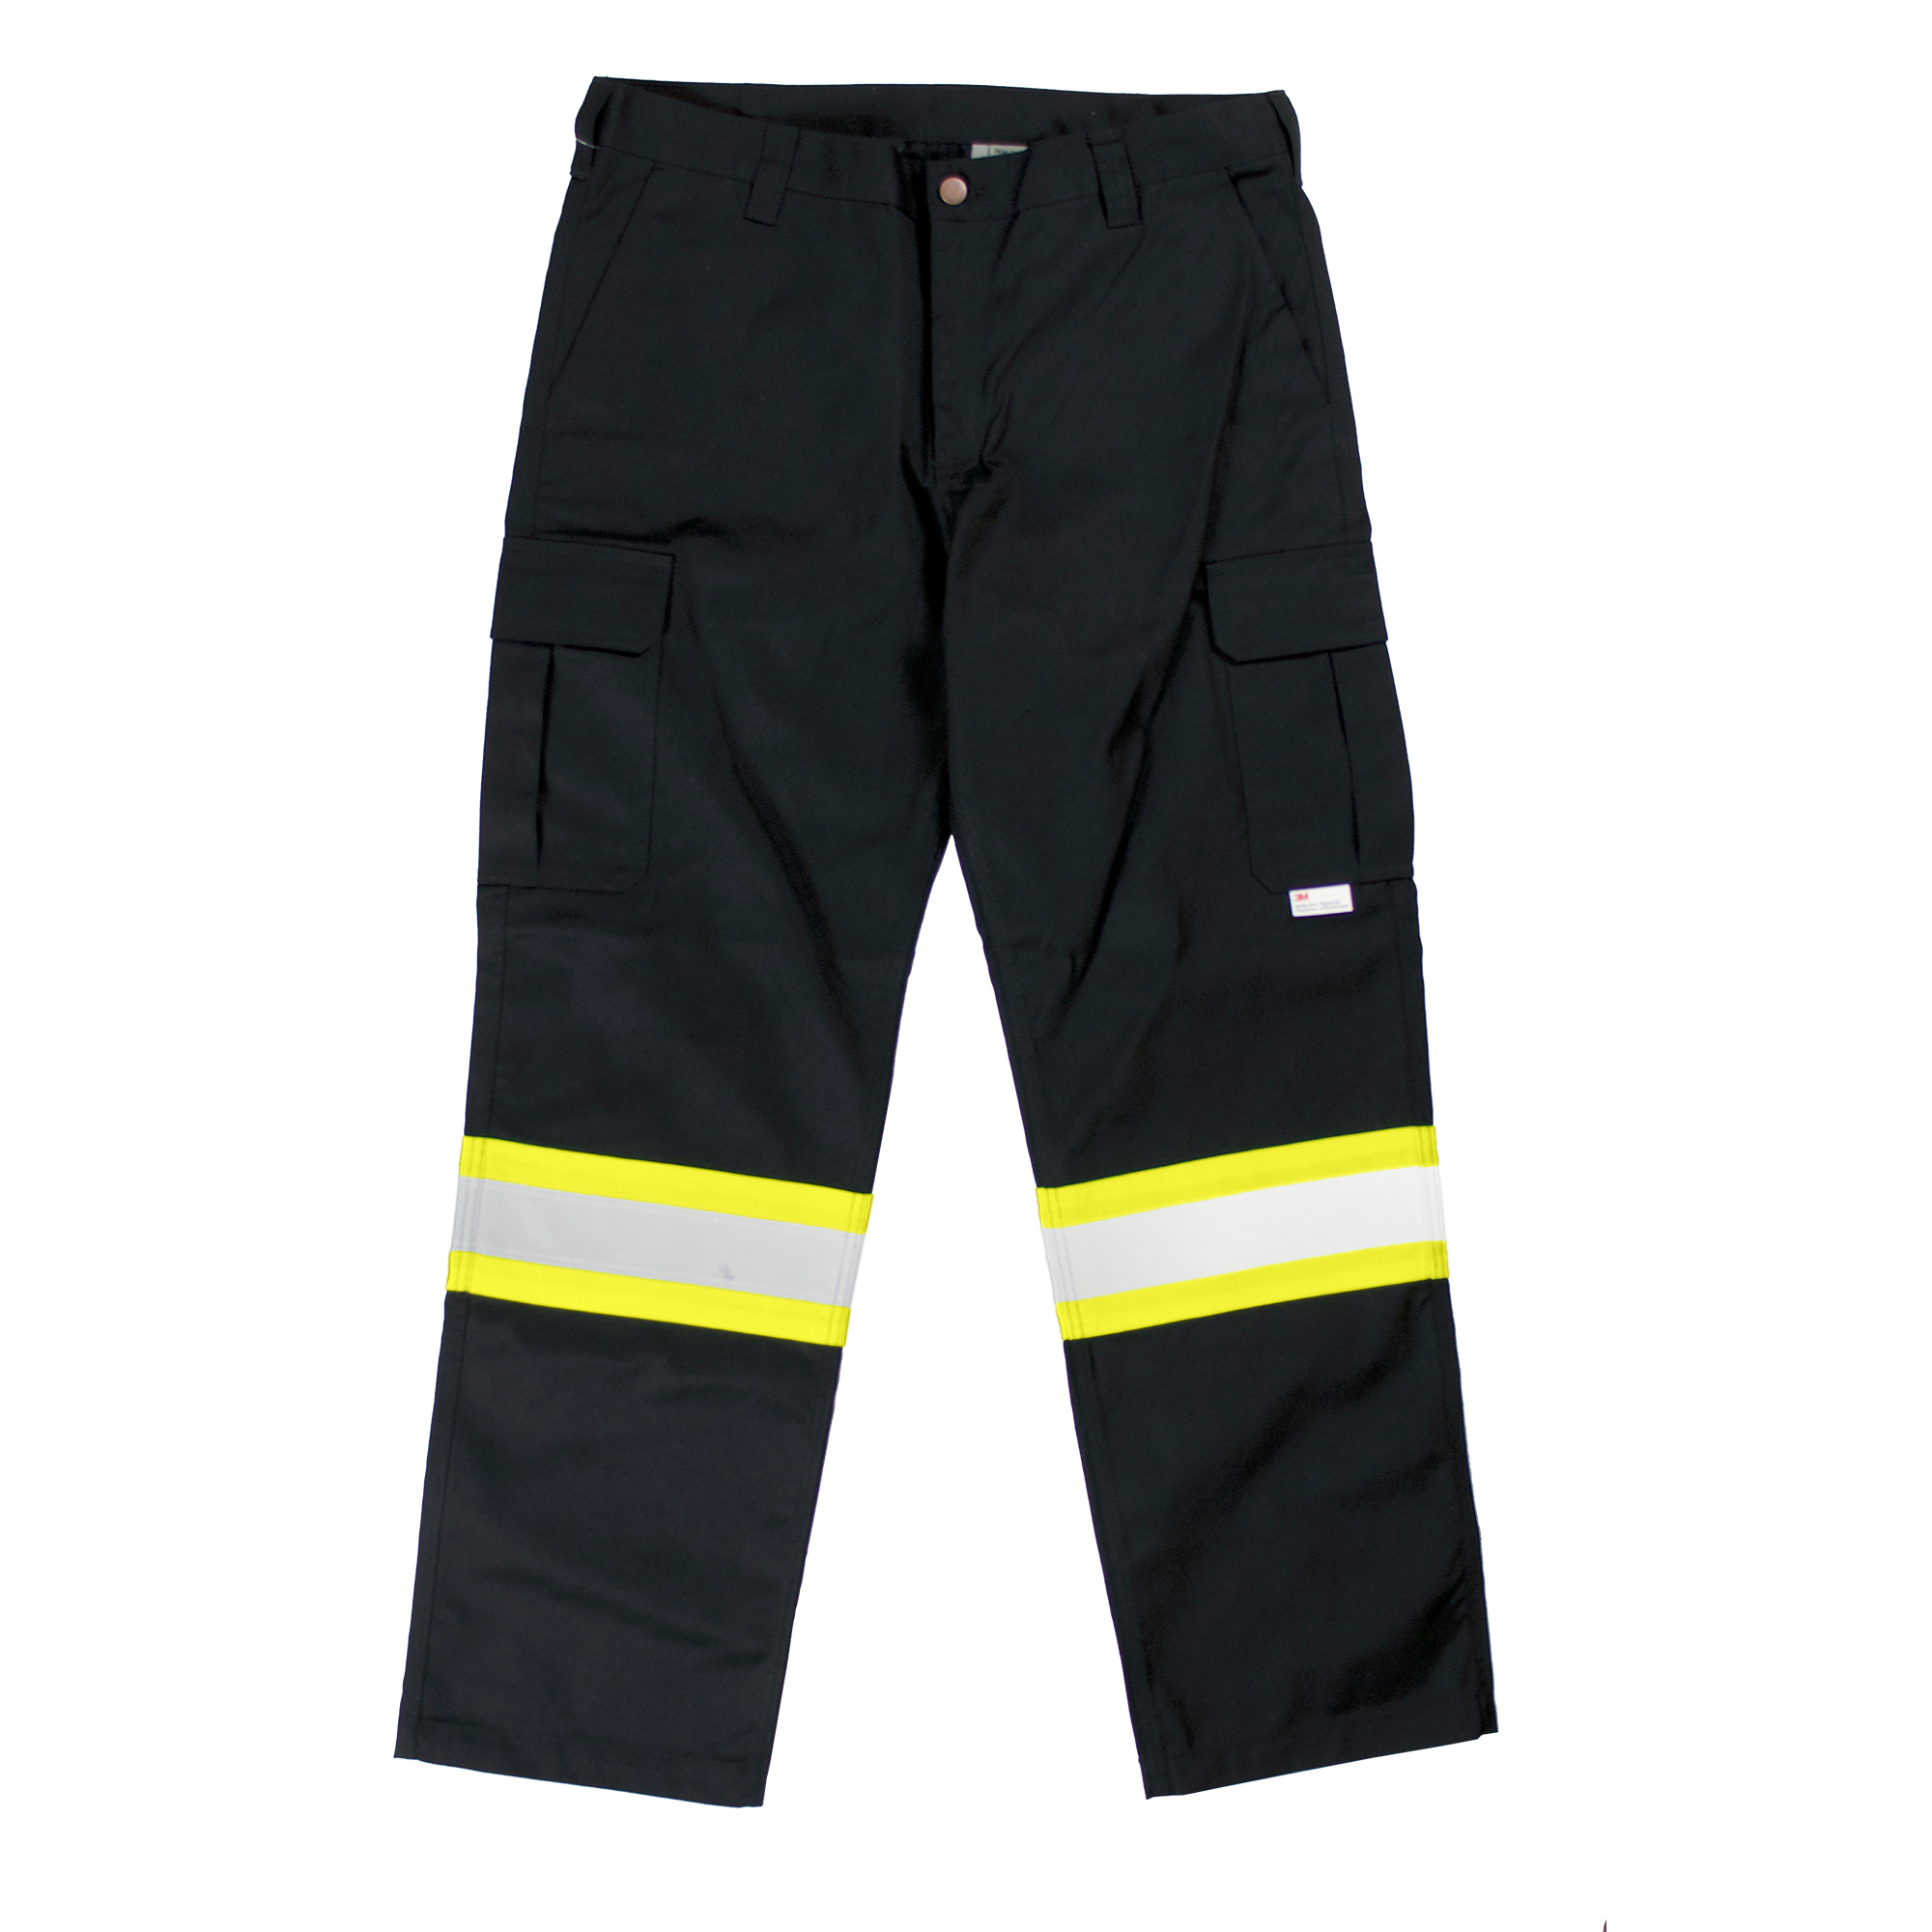 Tough Duck, Safety Cargo Utility Pant, Waist 42 in, Inseam 32 in, Color Black, Model S60711